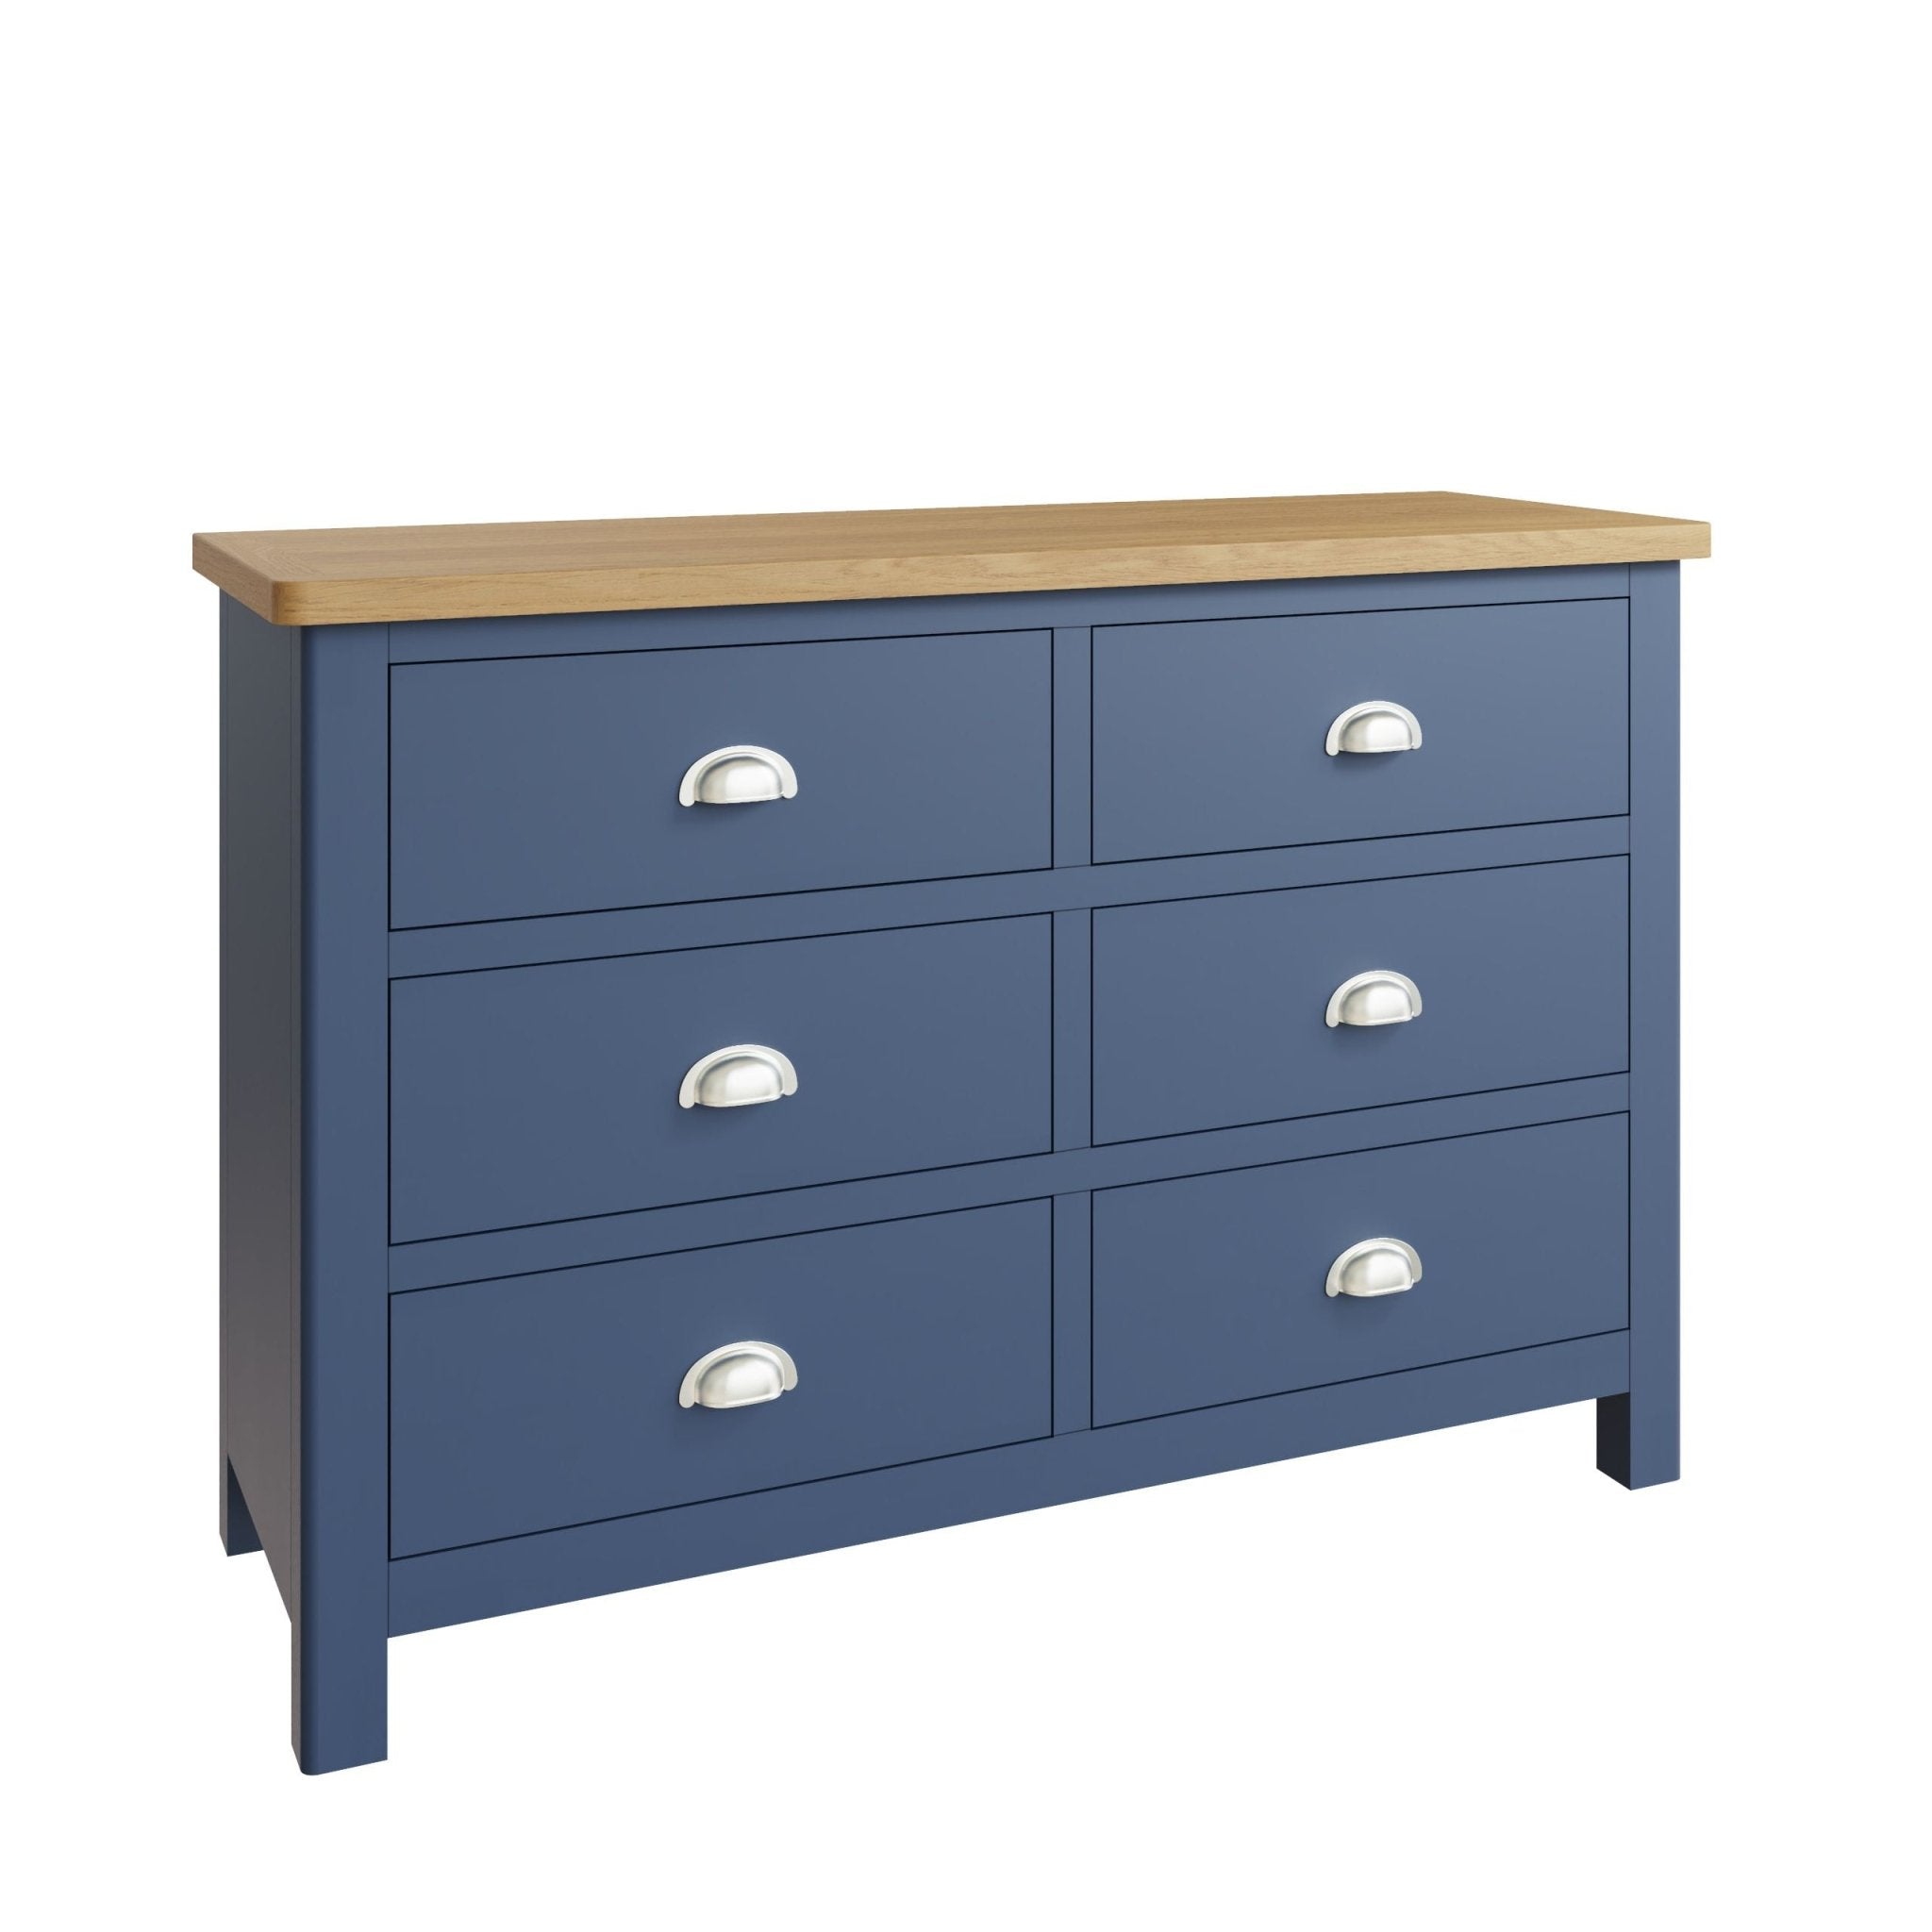 Bluebell Wood Chest of 6 Drawers - Duck Barn Interiors